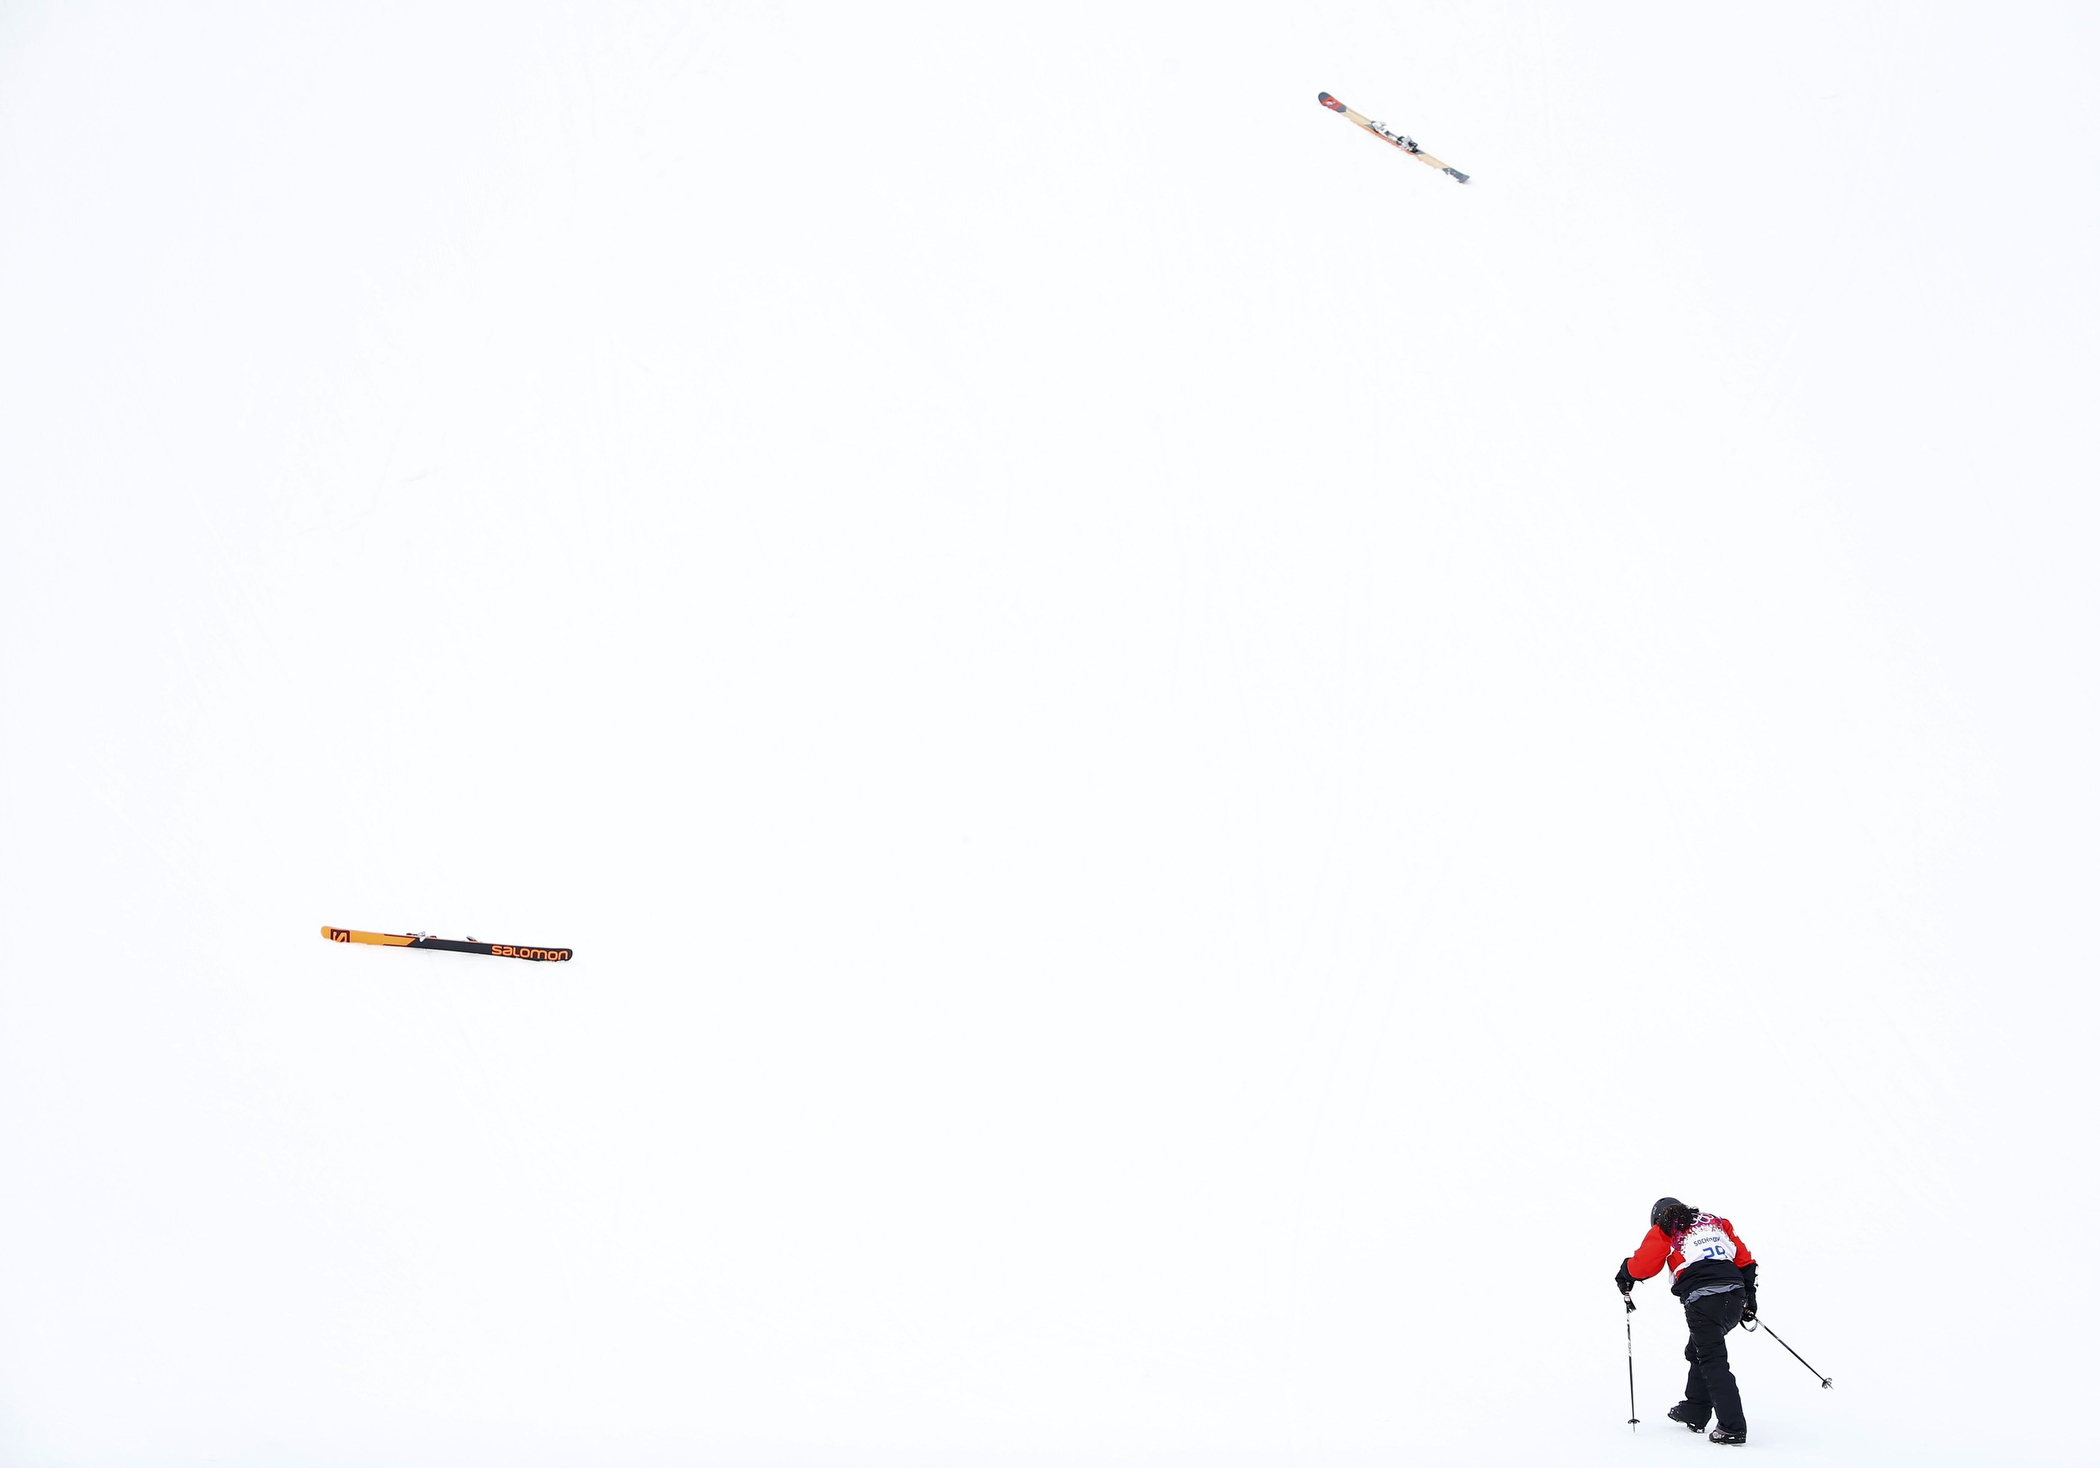 Paraguay's Julia Marino walks towards her skis after crashing during the women's freestyle skiing slopestyle qualification event at the 2014 Sochi Winter Olympic Games in Rosa Khutor Feb. 11, 2014.